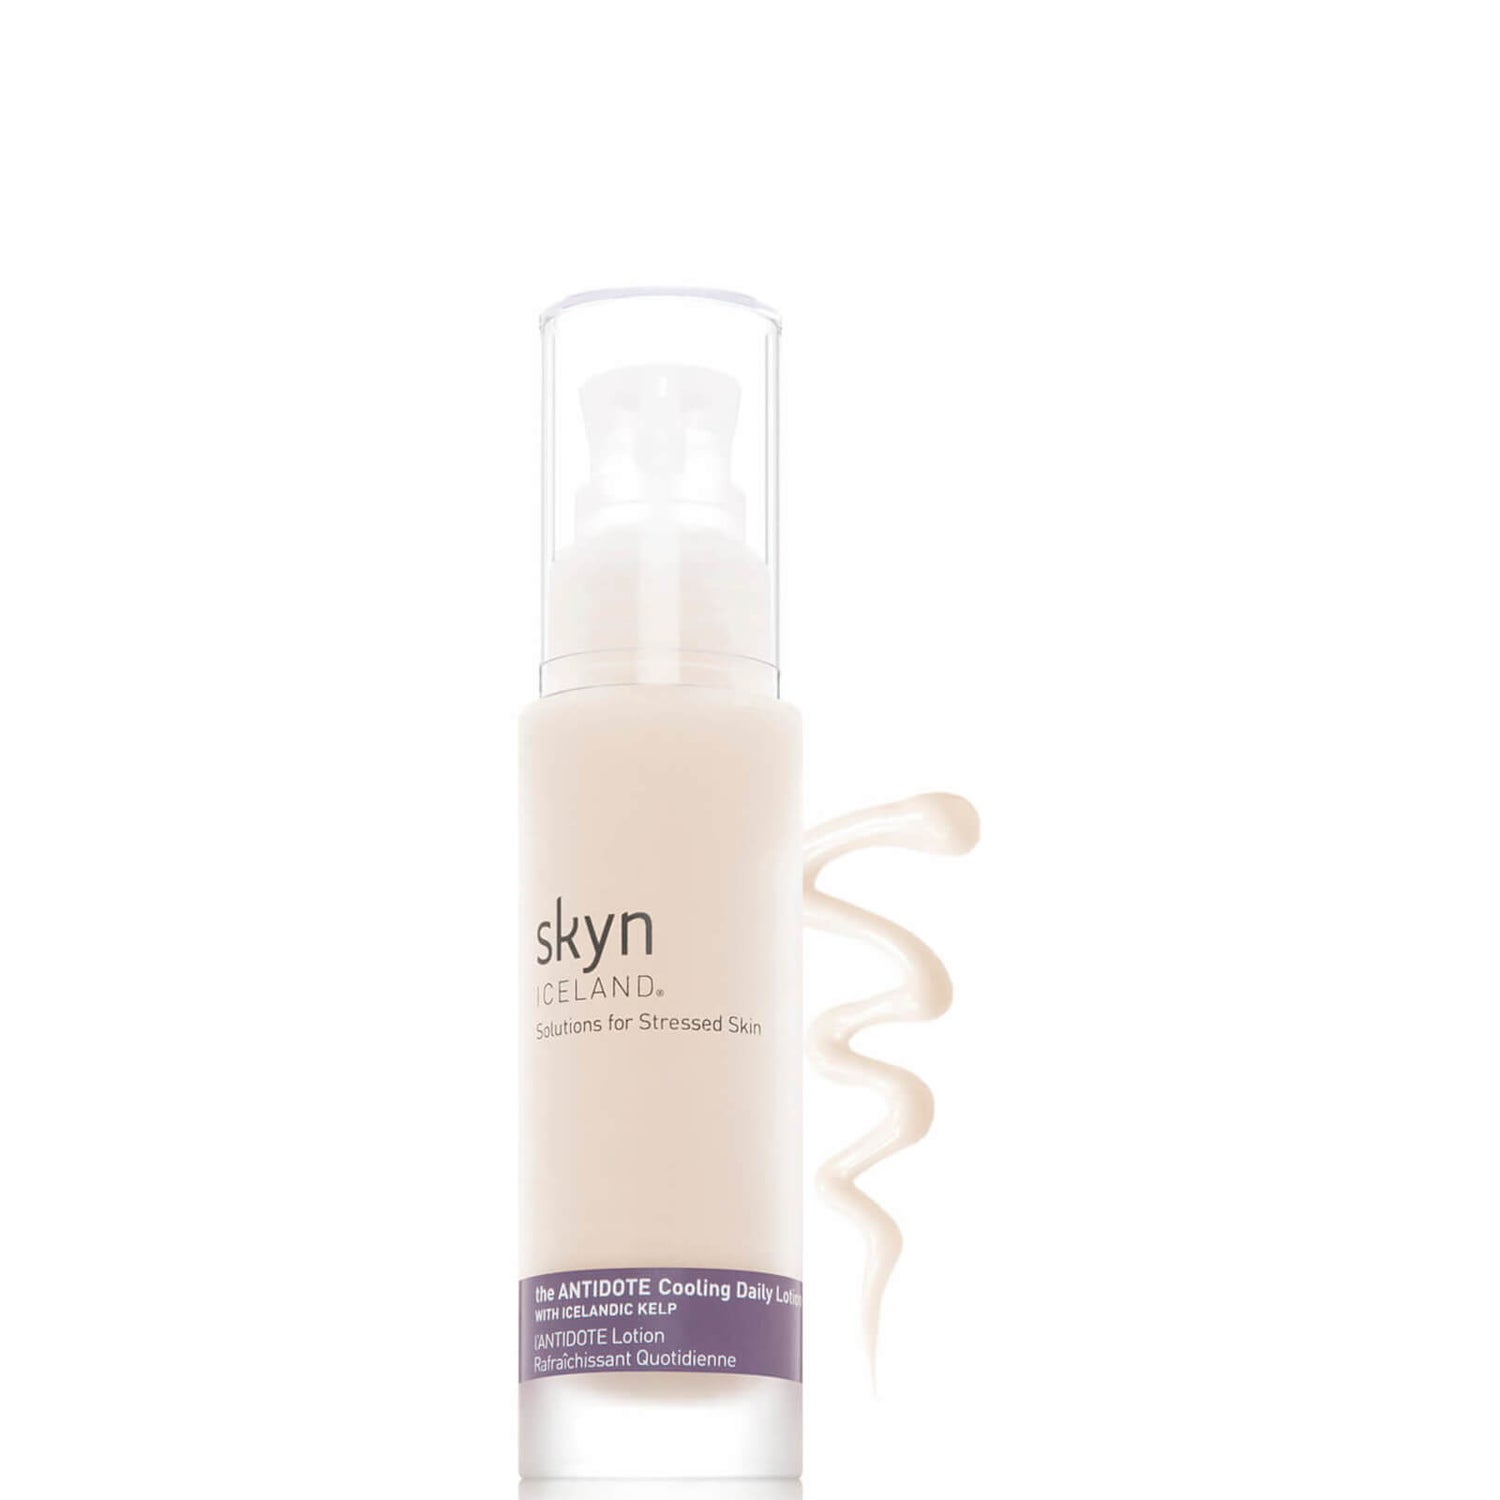 skyn ICELAND Antidote Cooling Daily Lotion